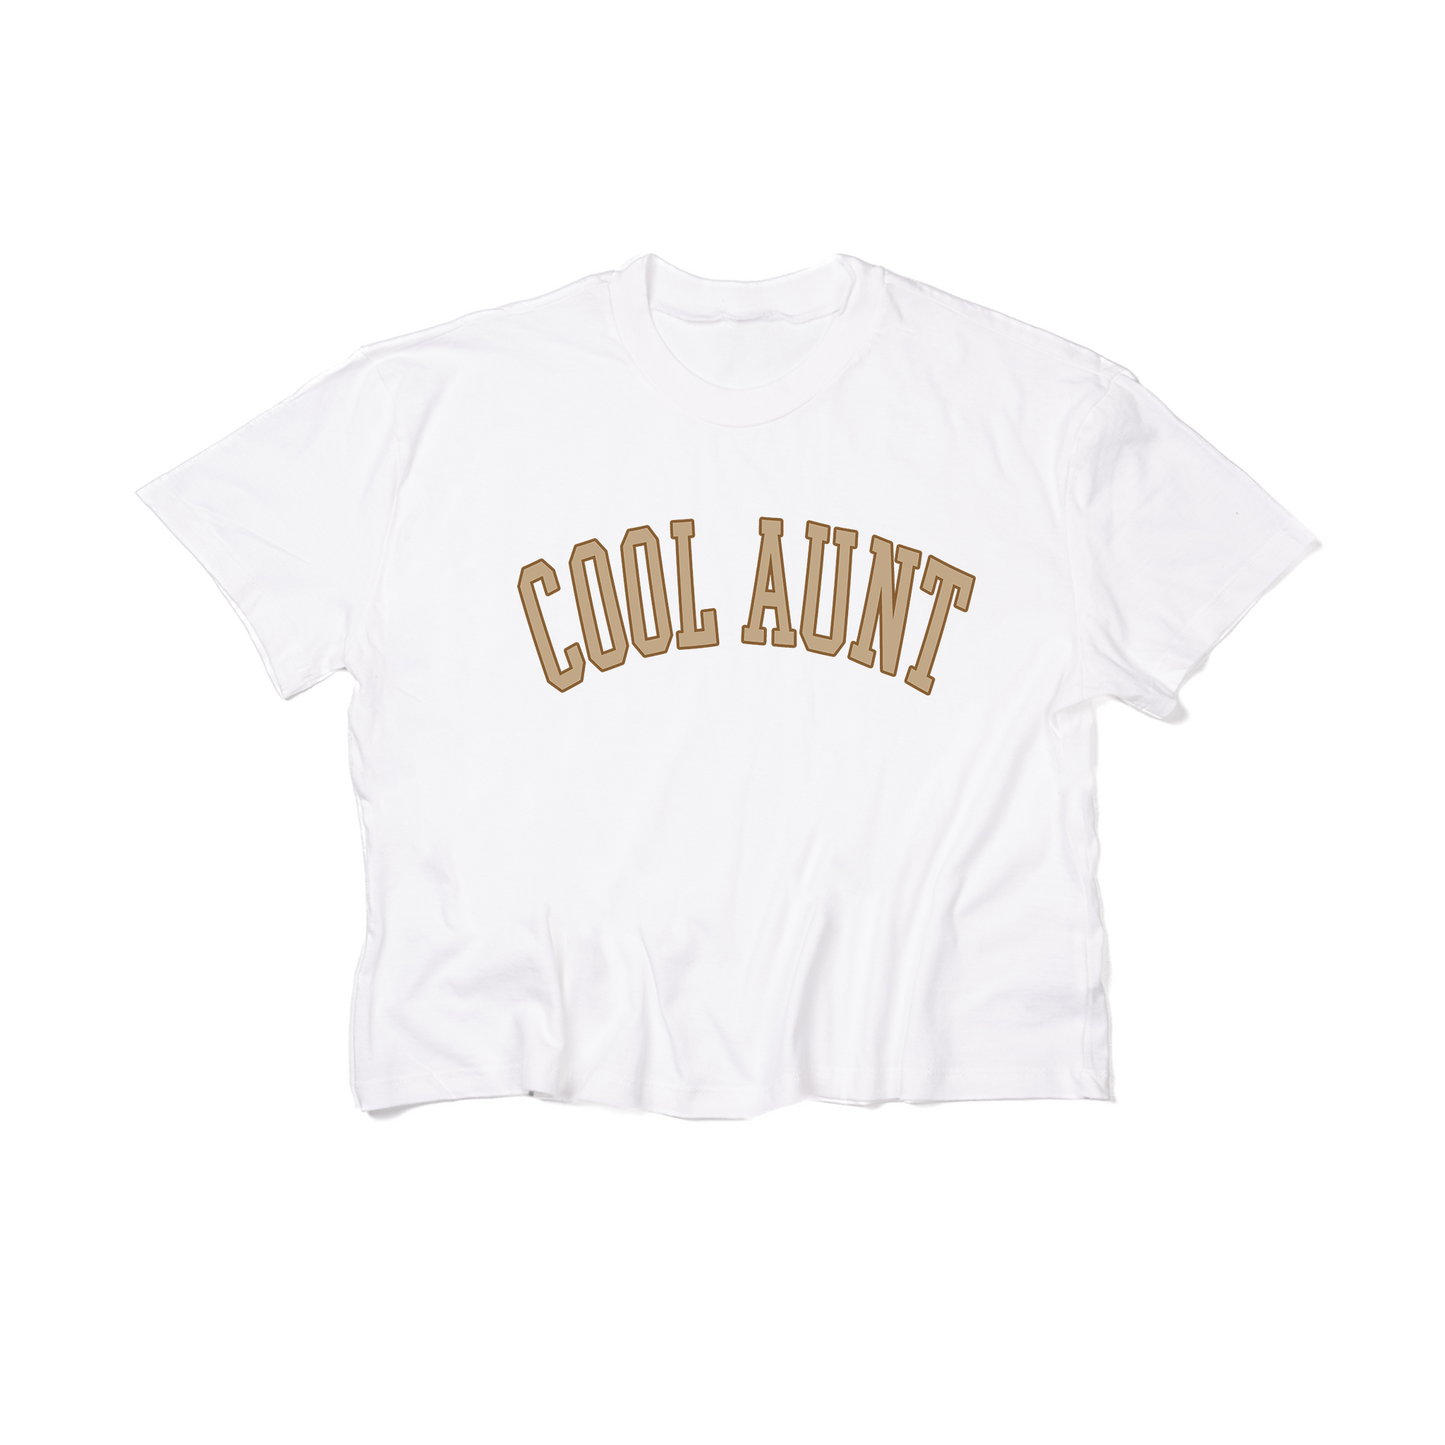 Cool Aunt (Tan Varsity) - Cropped Tee (White)